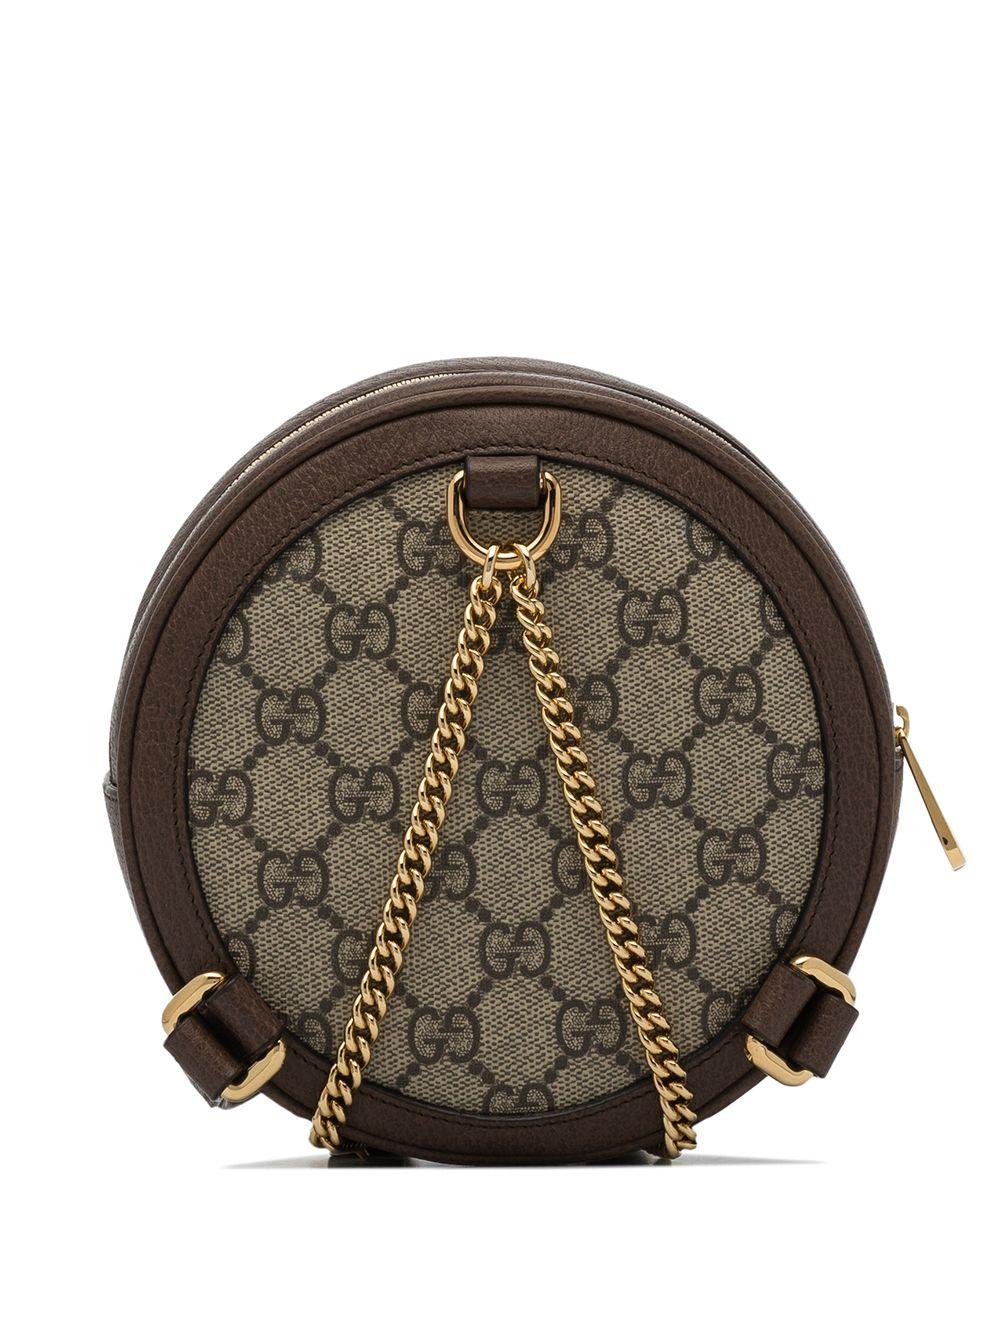 Gucci Leather Mini Ophidia Gg Supreme Round Bag in Taupe (Brown) - Lyst